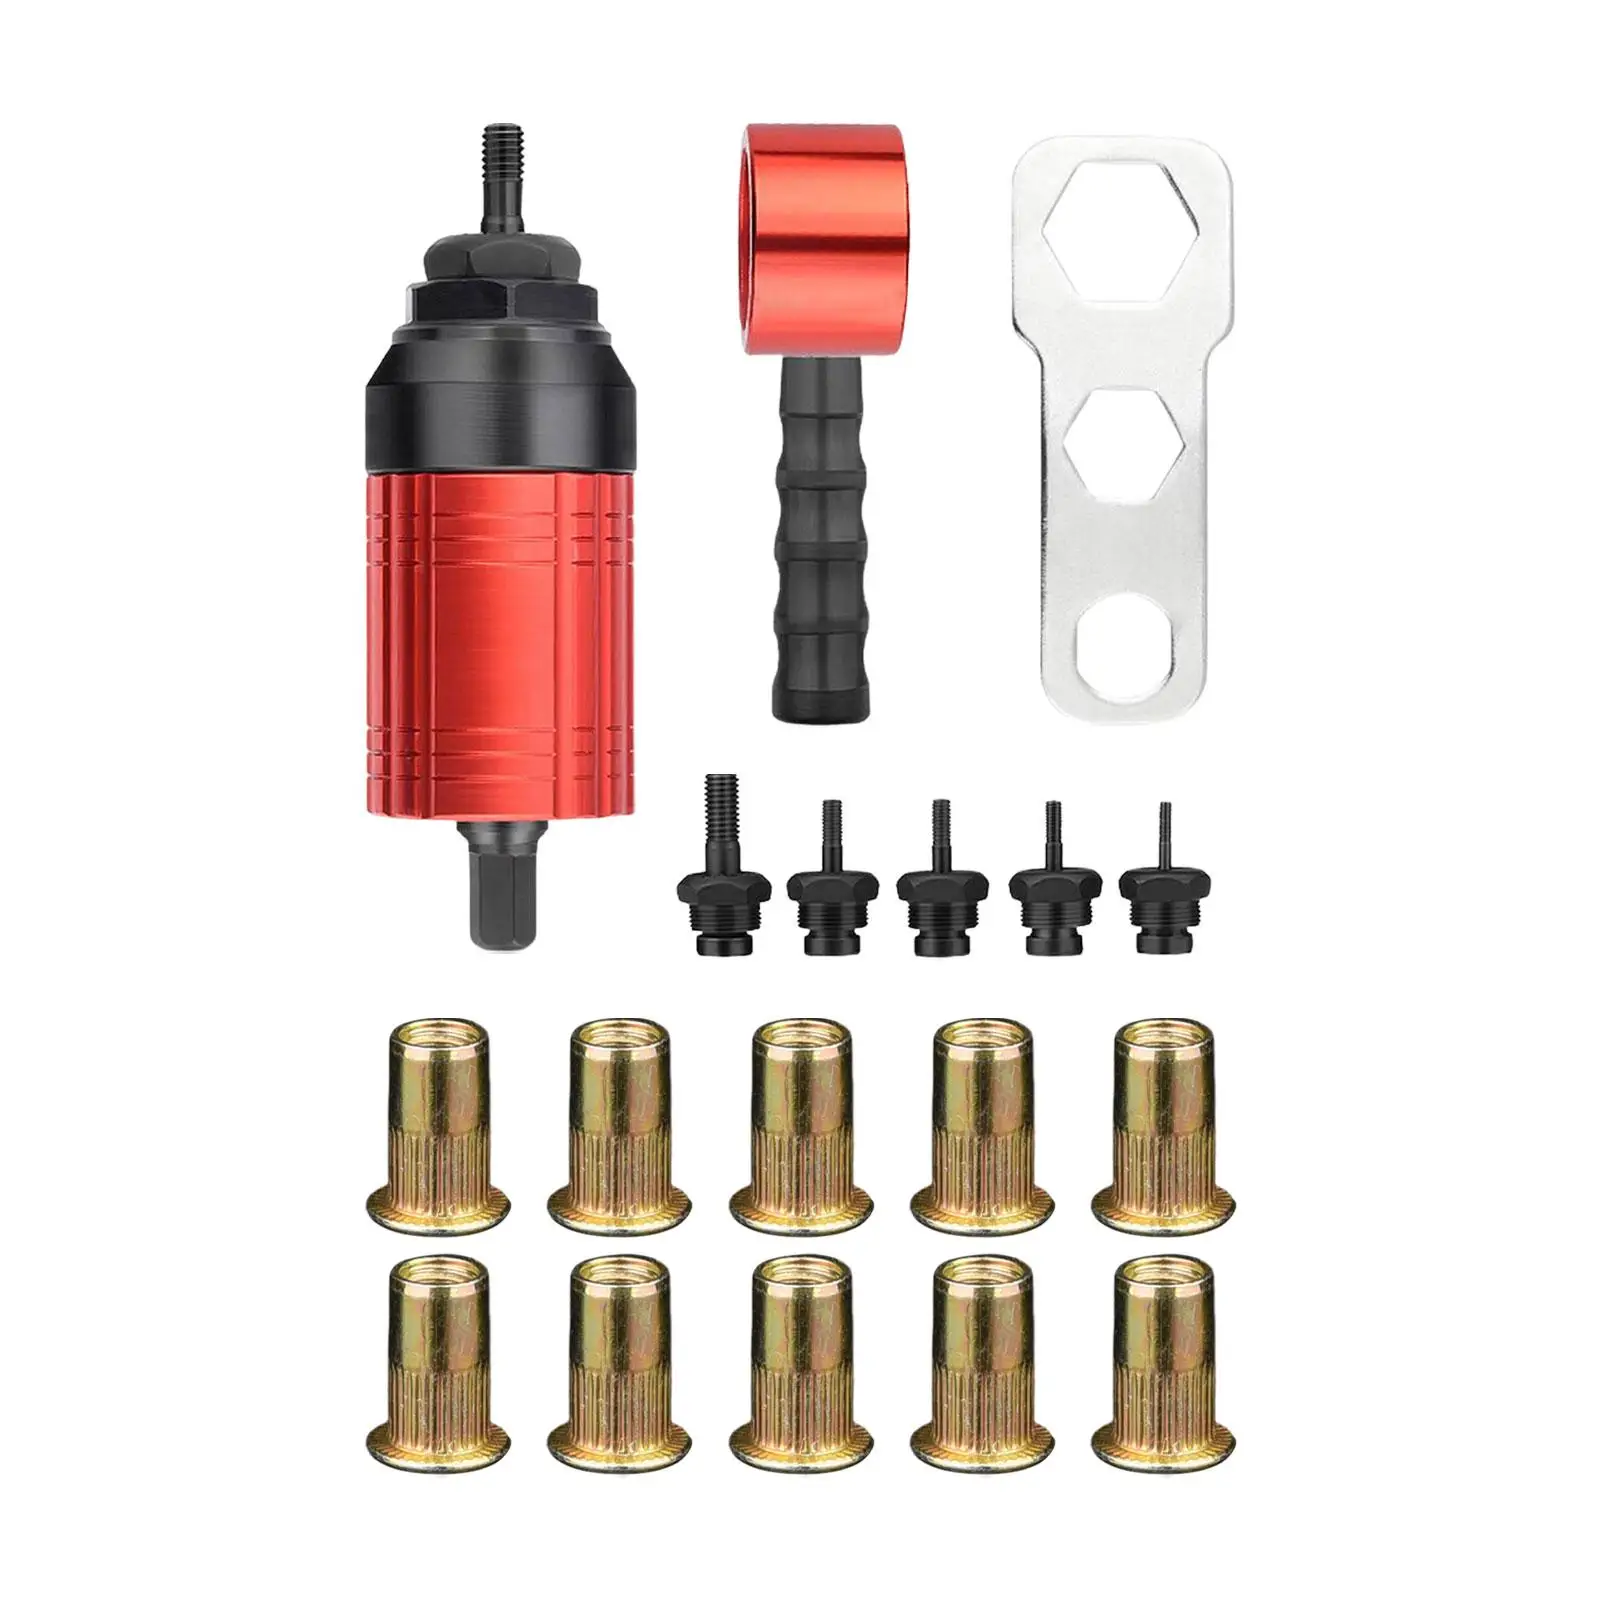 Rivet Nut Drill Adaptor Attachment Threaded Insert Installation Tool for Repair Electrical Appliance Car Furniture Architecture